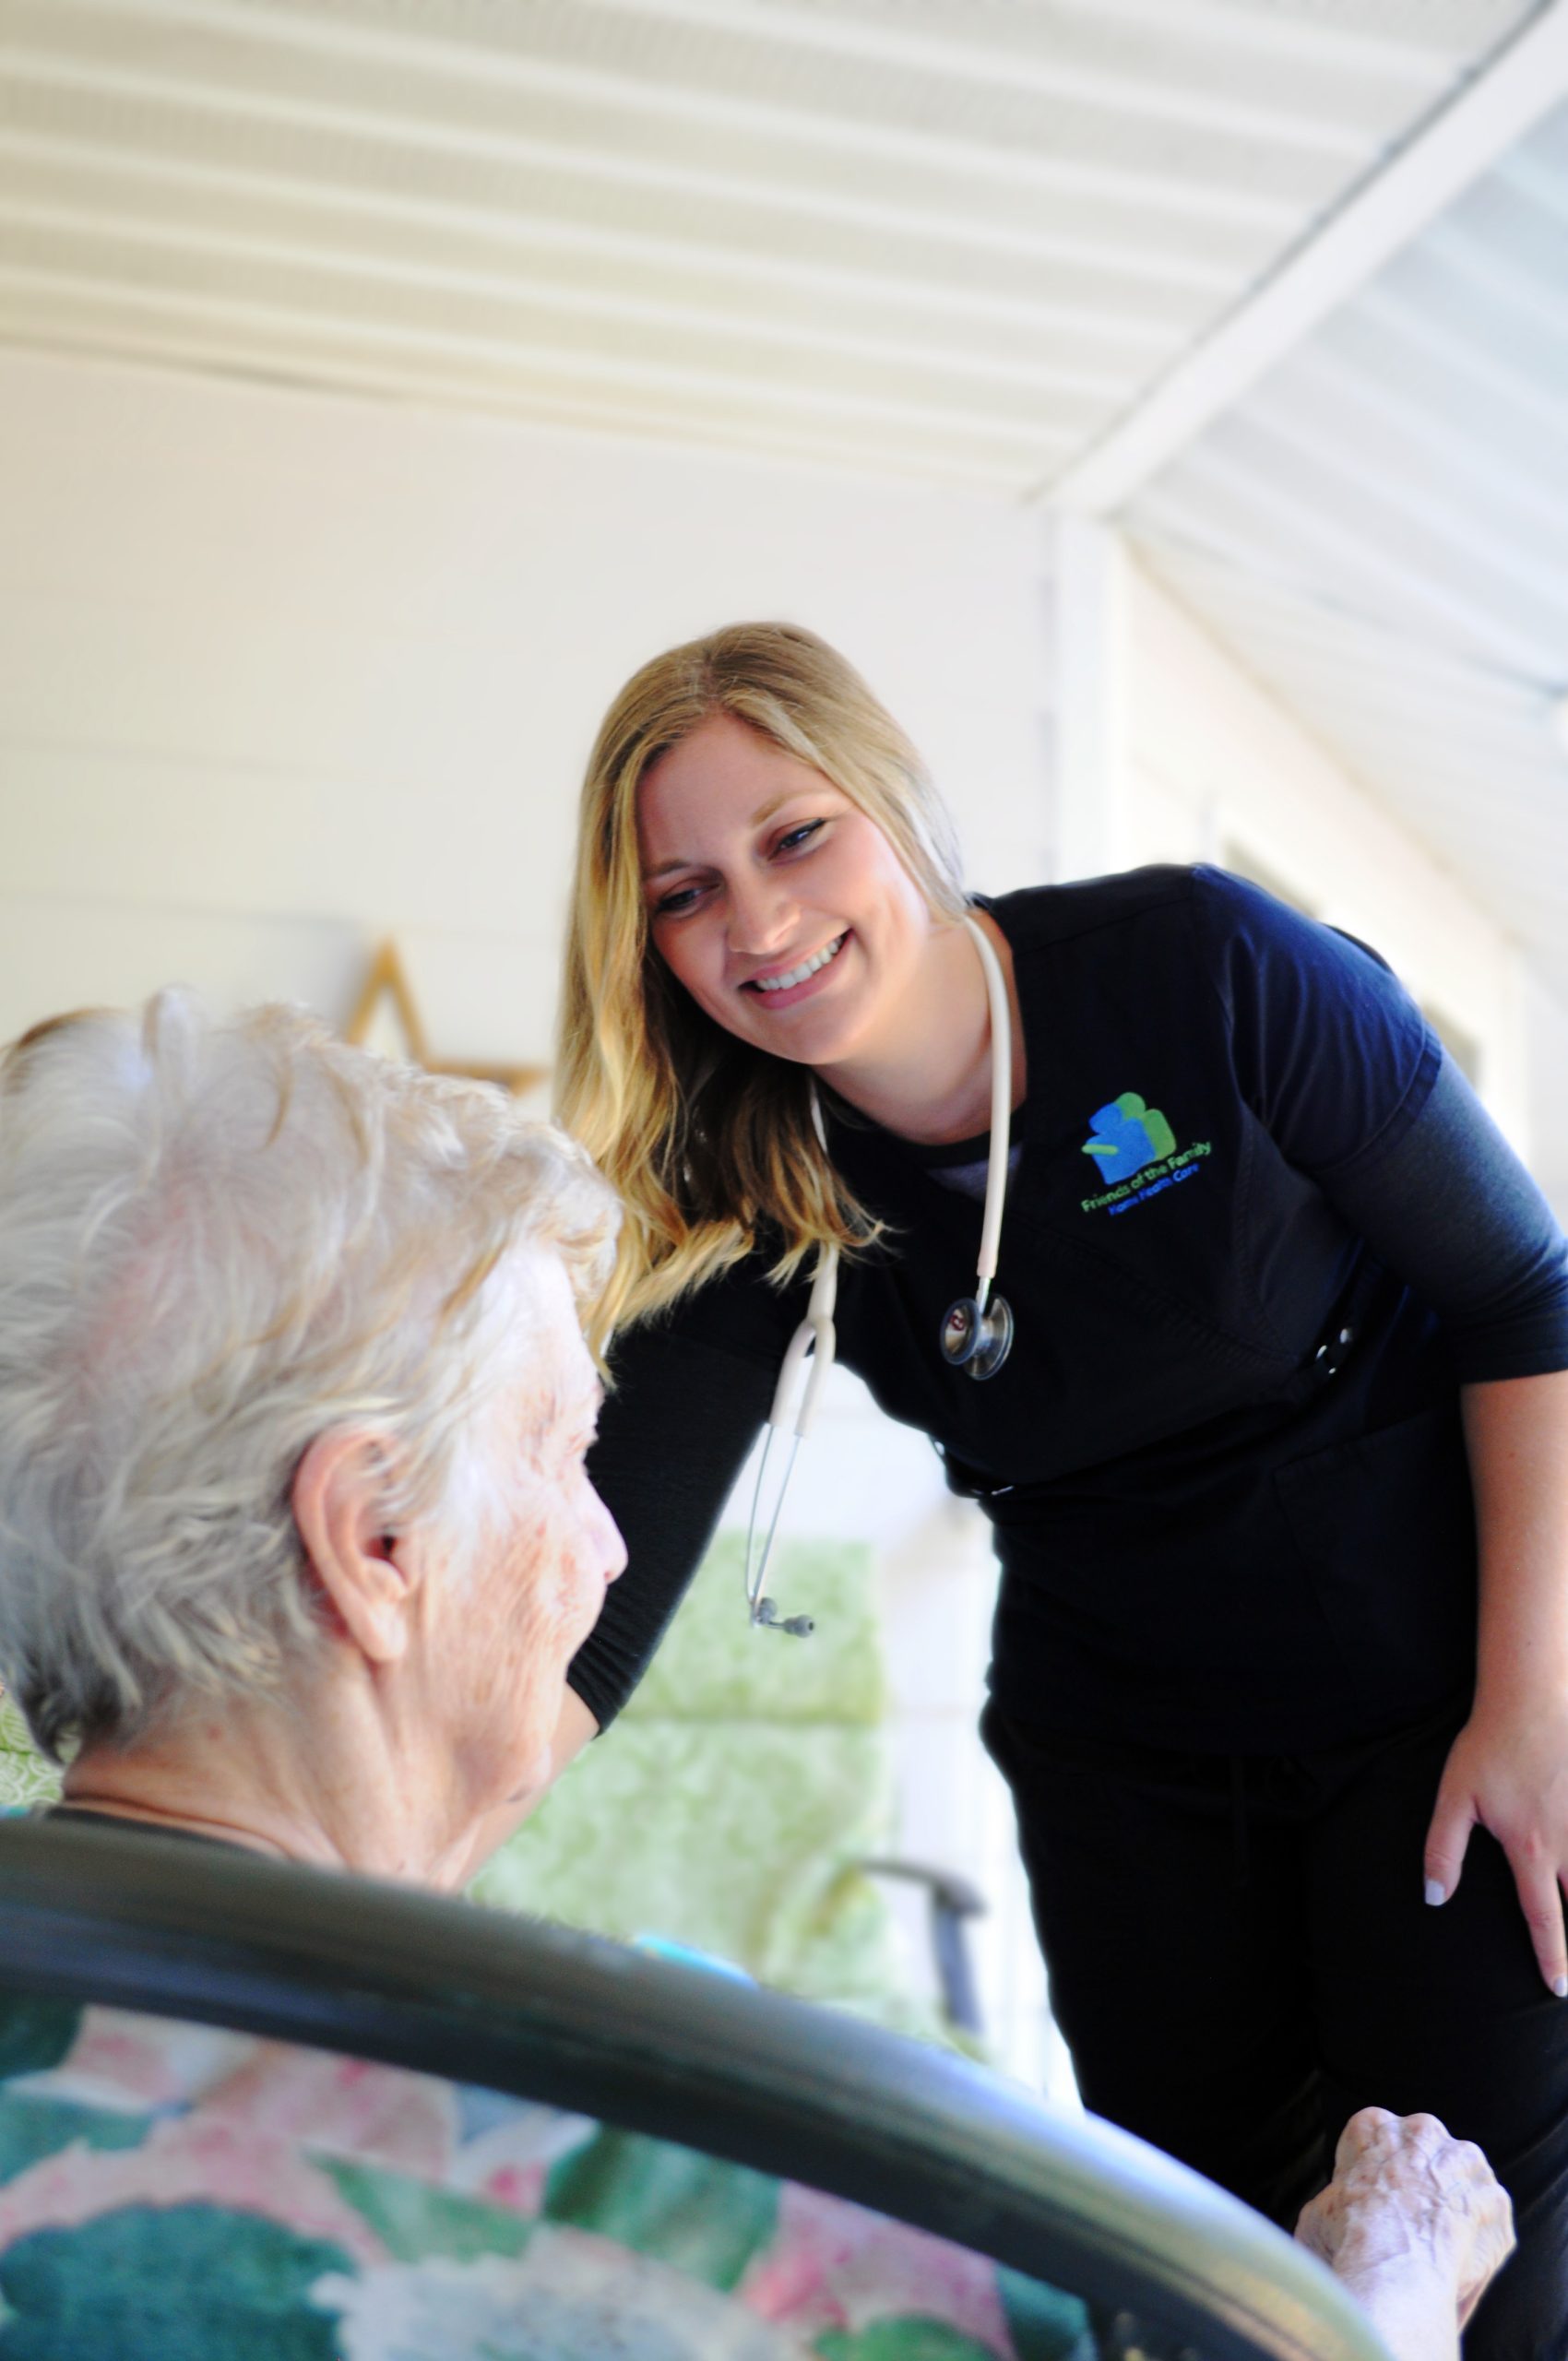 Friends of the Family Home Health Care Aide assisting elderly companion care patient with personal hygiene.